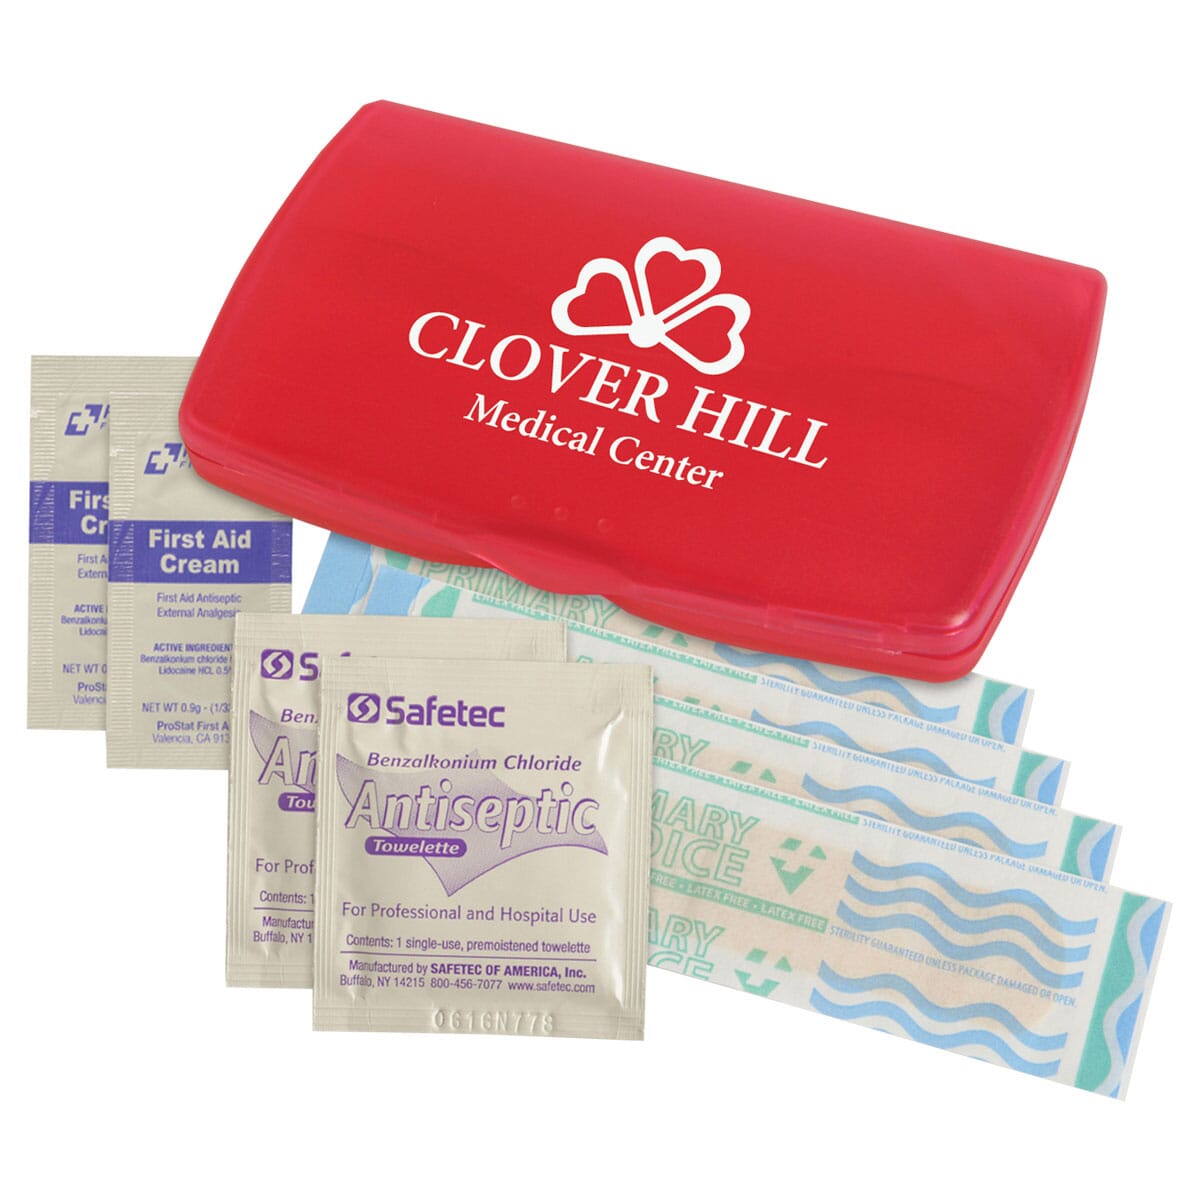 Travel size first aid kit with wipes, bandages, cream, and carry case